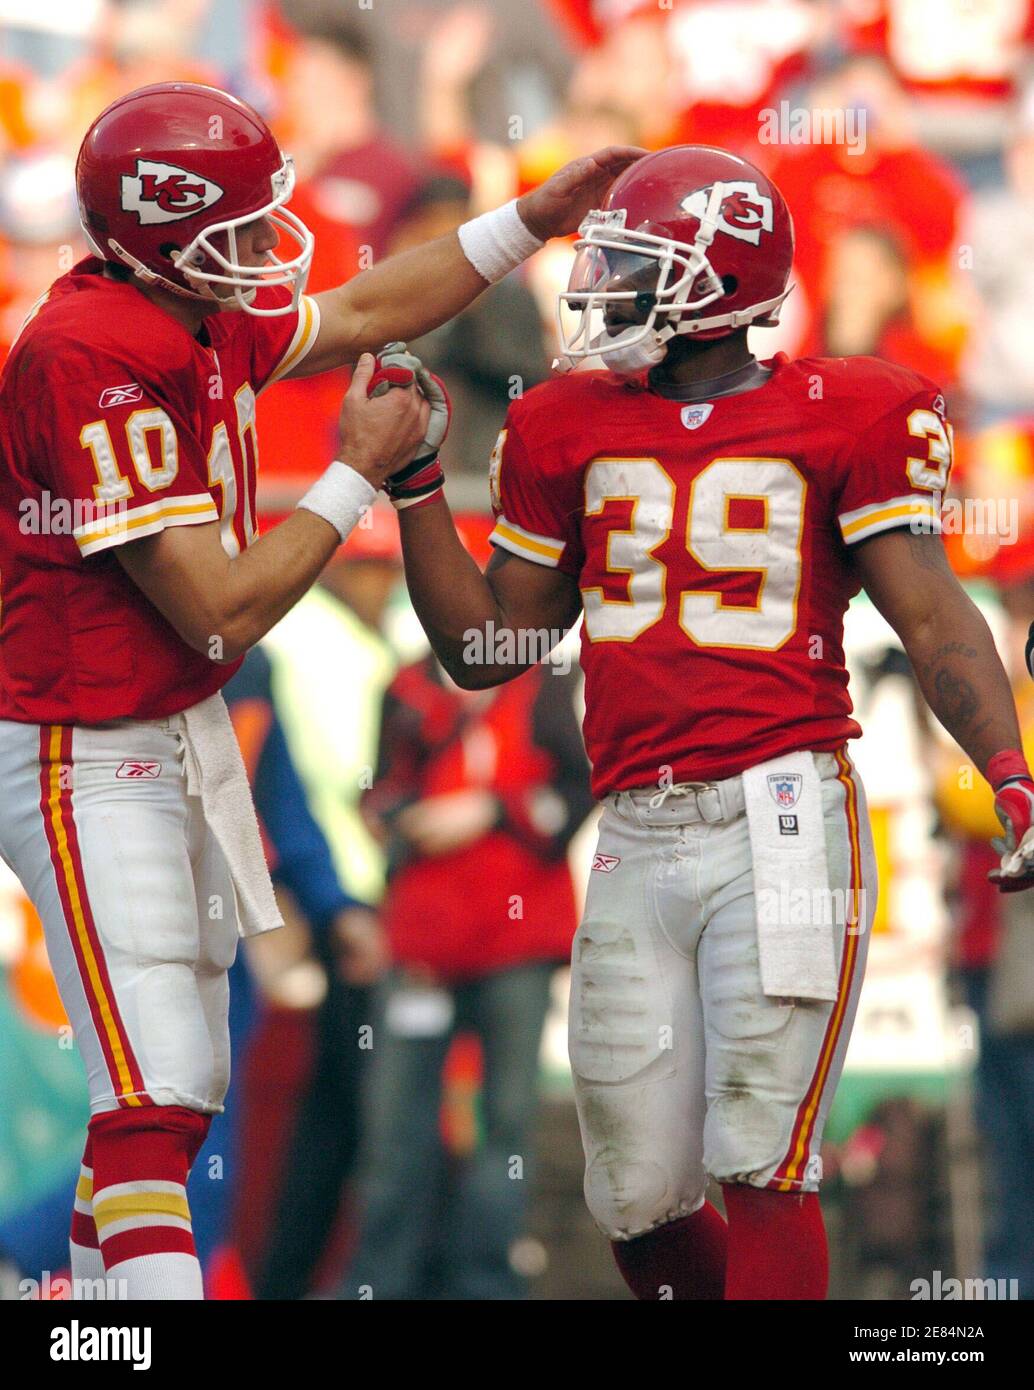 Kansas City Chiefs quarterback Trent Green (L) congratulates runningback Dee Brown after scoring the last touchdown of the game against the Cincinnati Bengals during their NFL game at Arrowhead Stadium in Kansas City, Missouri January 1, 2006. The Chiefs won 37-3, but will not go on to the playoffs because of the outcome of other games. REUTERS/Dave Kaup Stock Photo